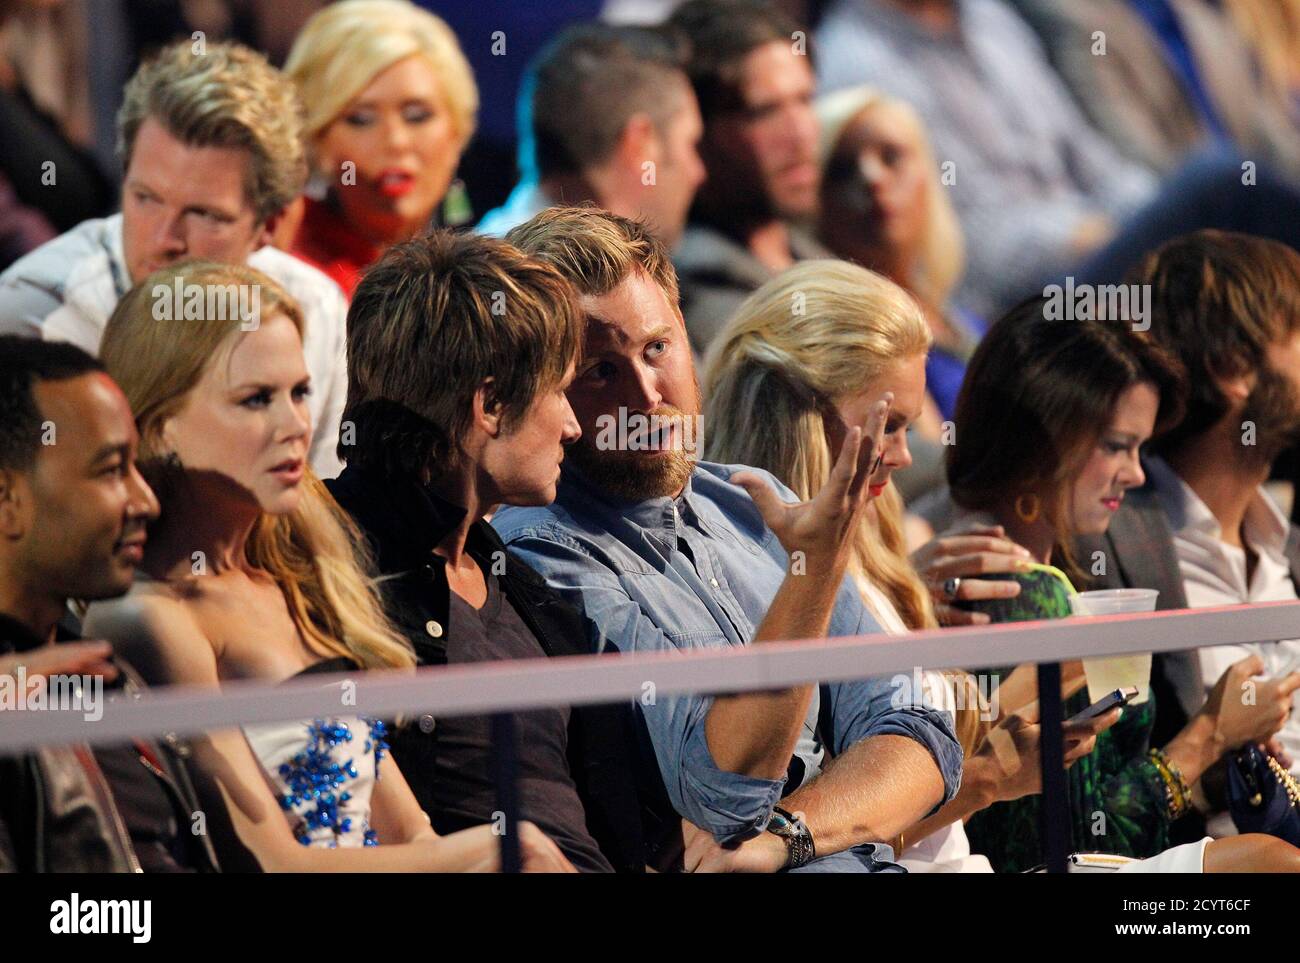 Musicians Charles Kelley (R) and Keith Urban chat in the audience as Urban's wife, actress Nicole Kidman, watches the show during the 2014 CMT Music Awards in Nashville, Tennessee June 4, 2014.   REUTERS/Harrison McClary (UNITED STATES  - Tags: ENTERTAINMENT) Stock Photo